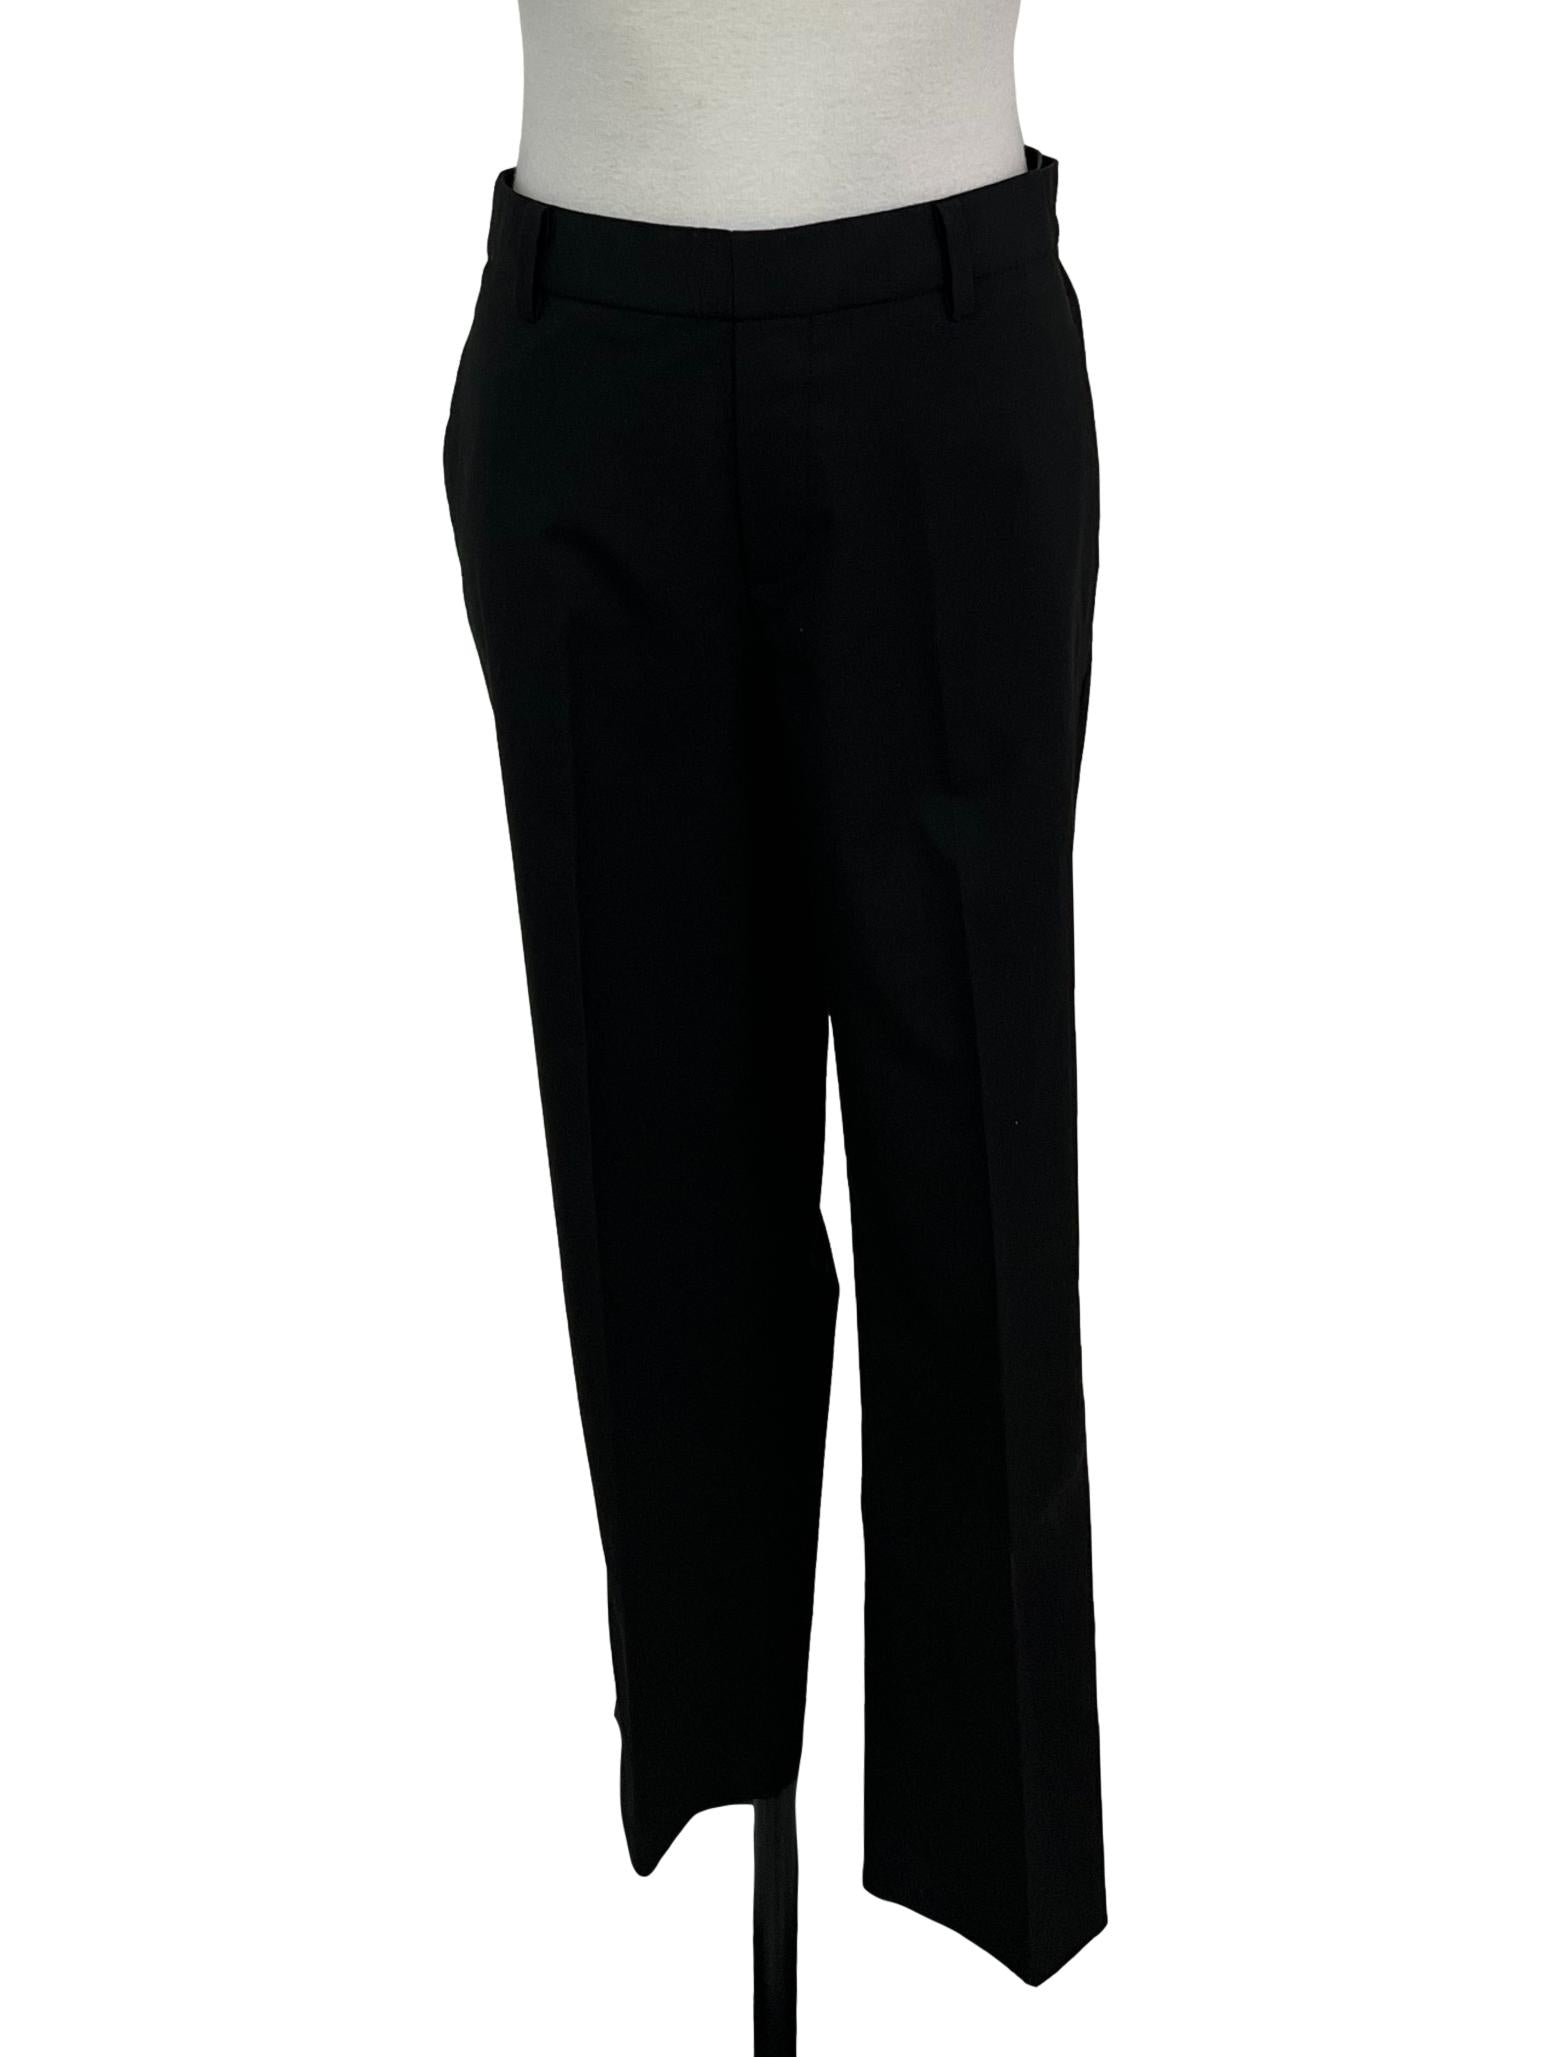 Uniqlo Black Formal Pants, Women's Fashion, Bottoms, Other Bottoms on ...